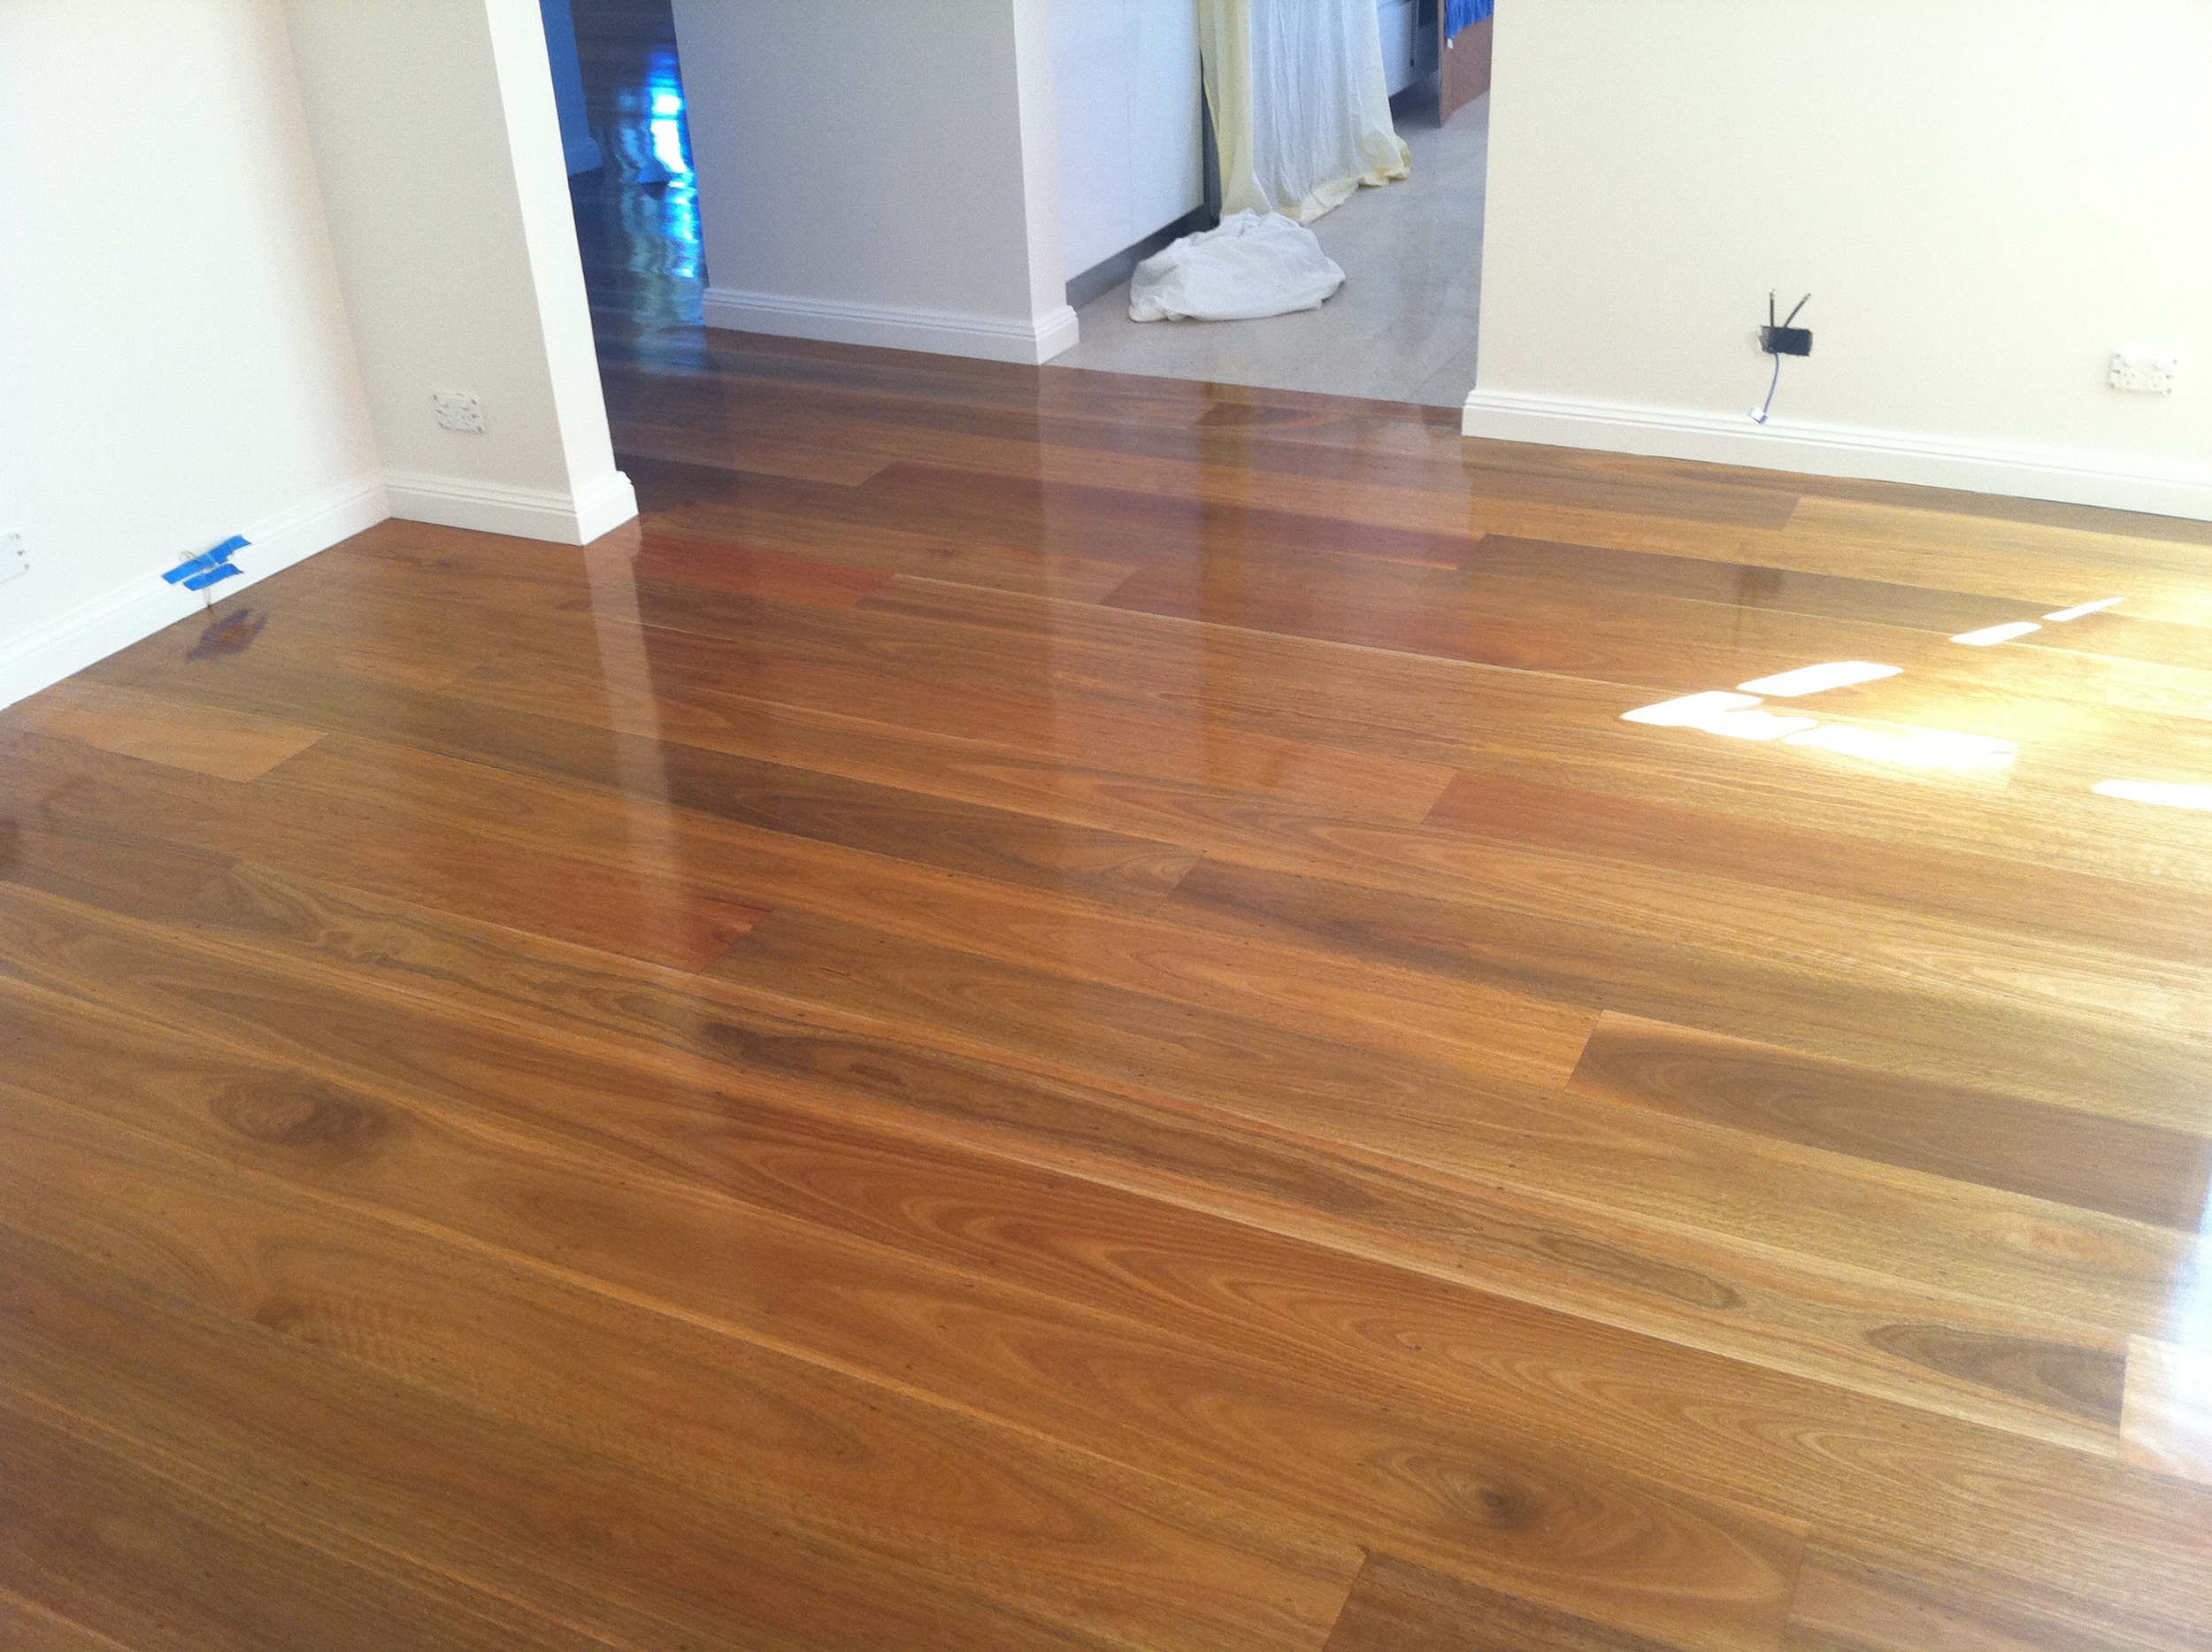  Spotted Gum 180mm wide timber floorboards, finished with a Modified Oil Gloss   